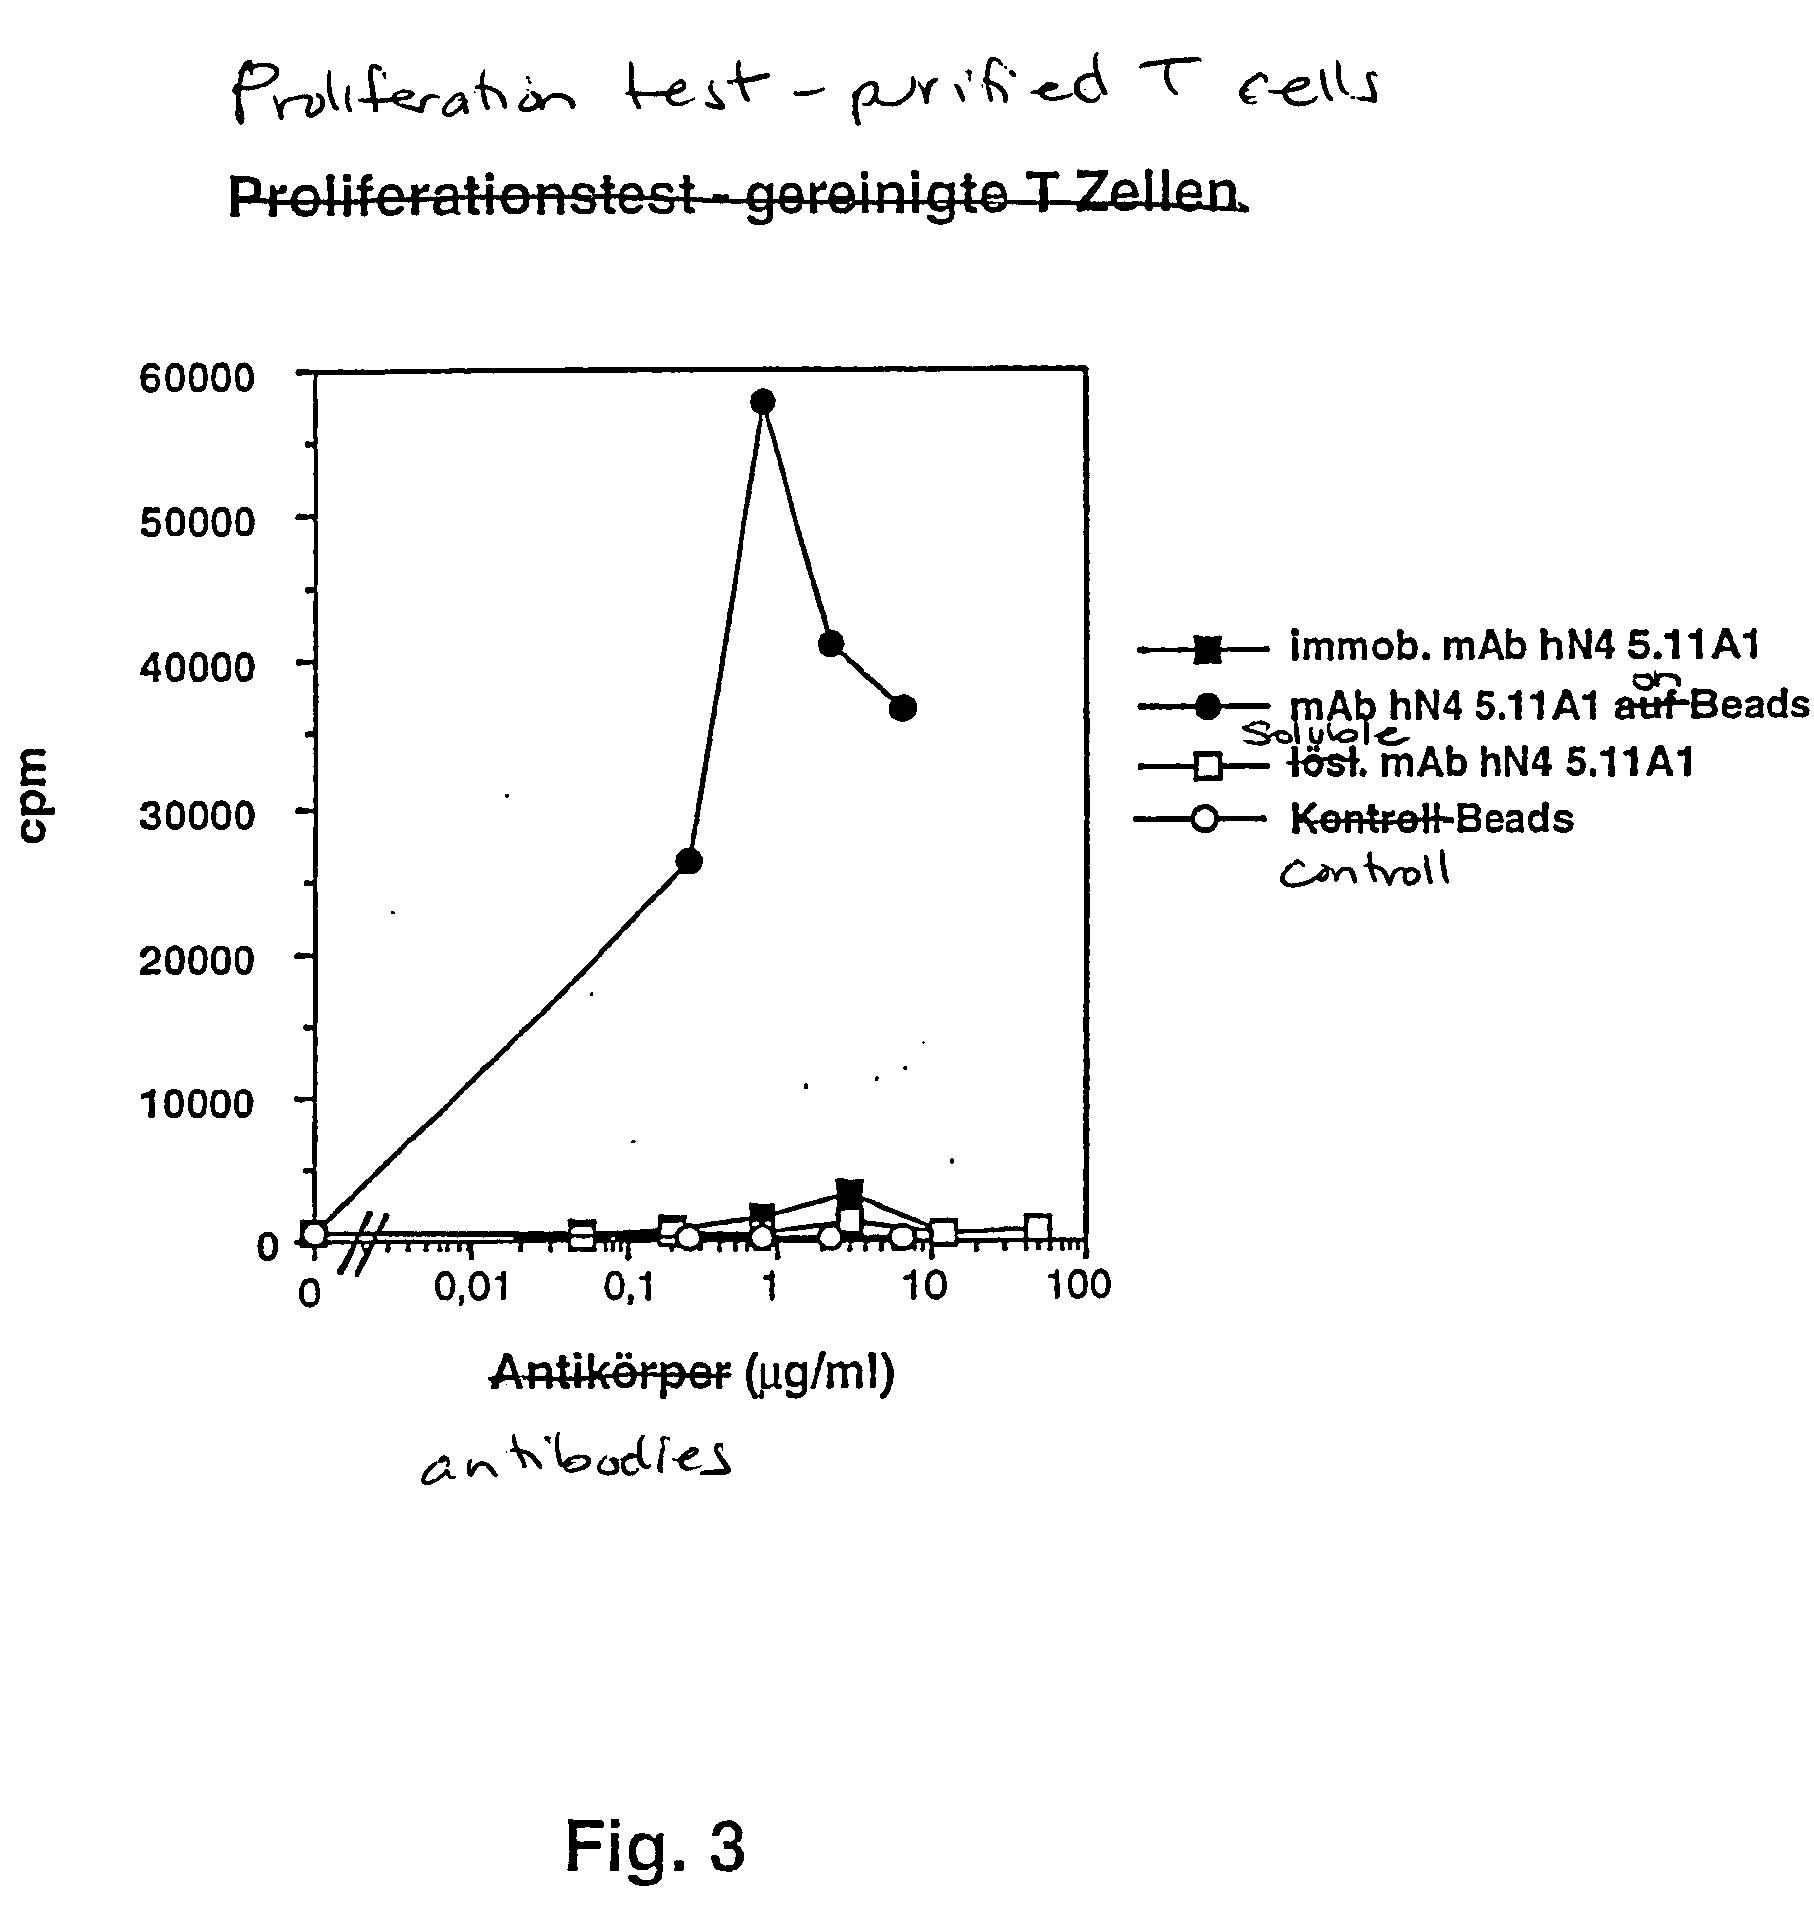 Microparticle with cd28-specific monoclonal antibodies